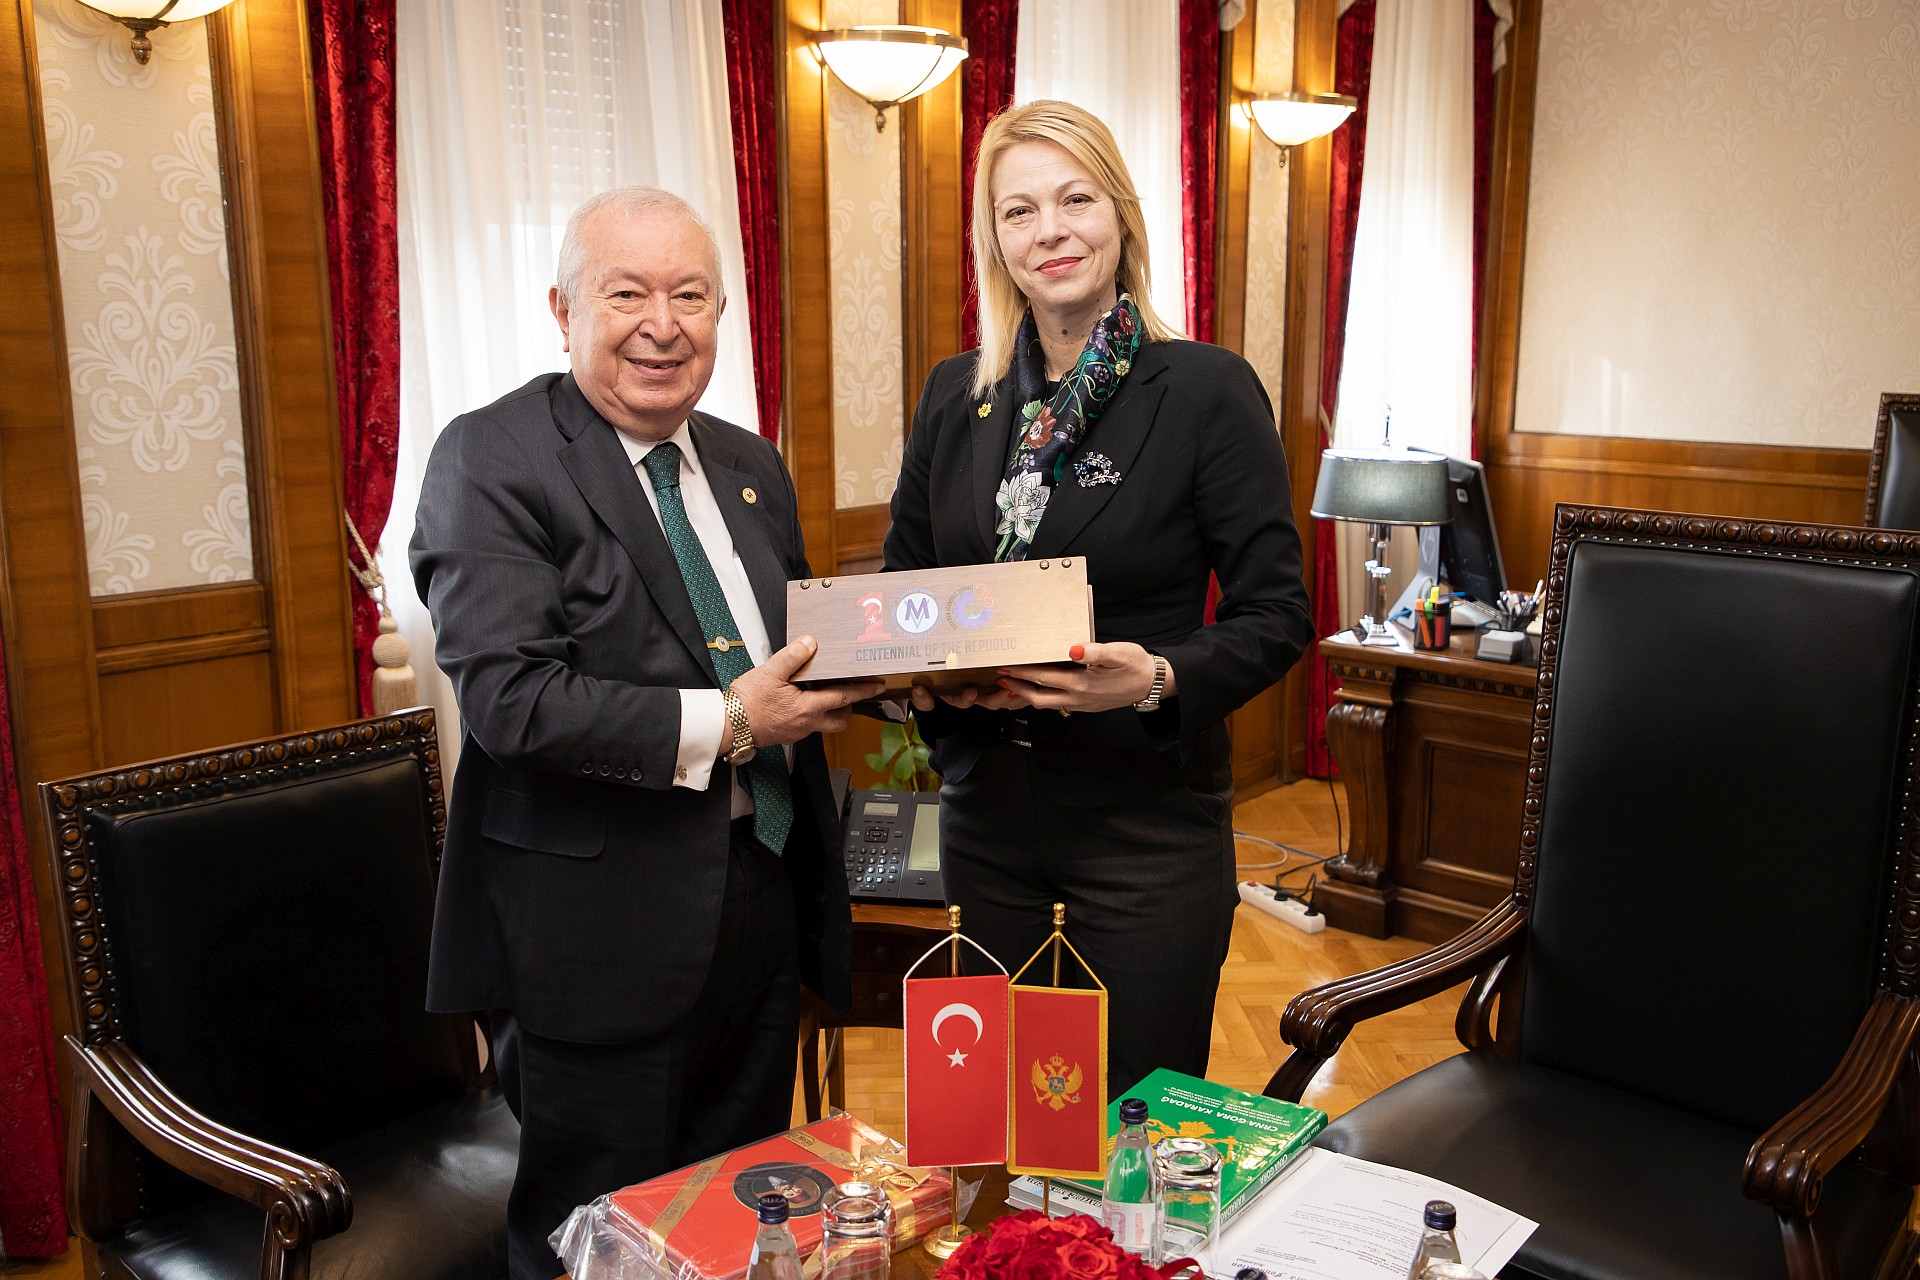  Speaker of the Parliament of Montenegro received the M